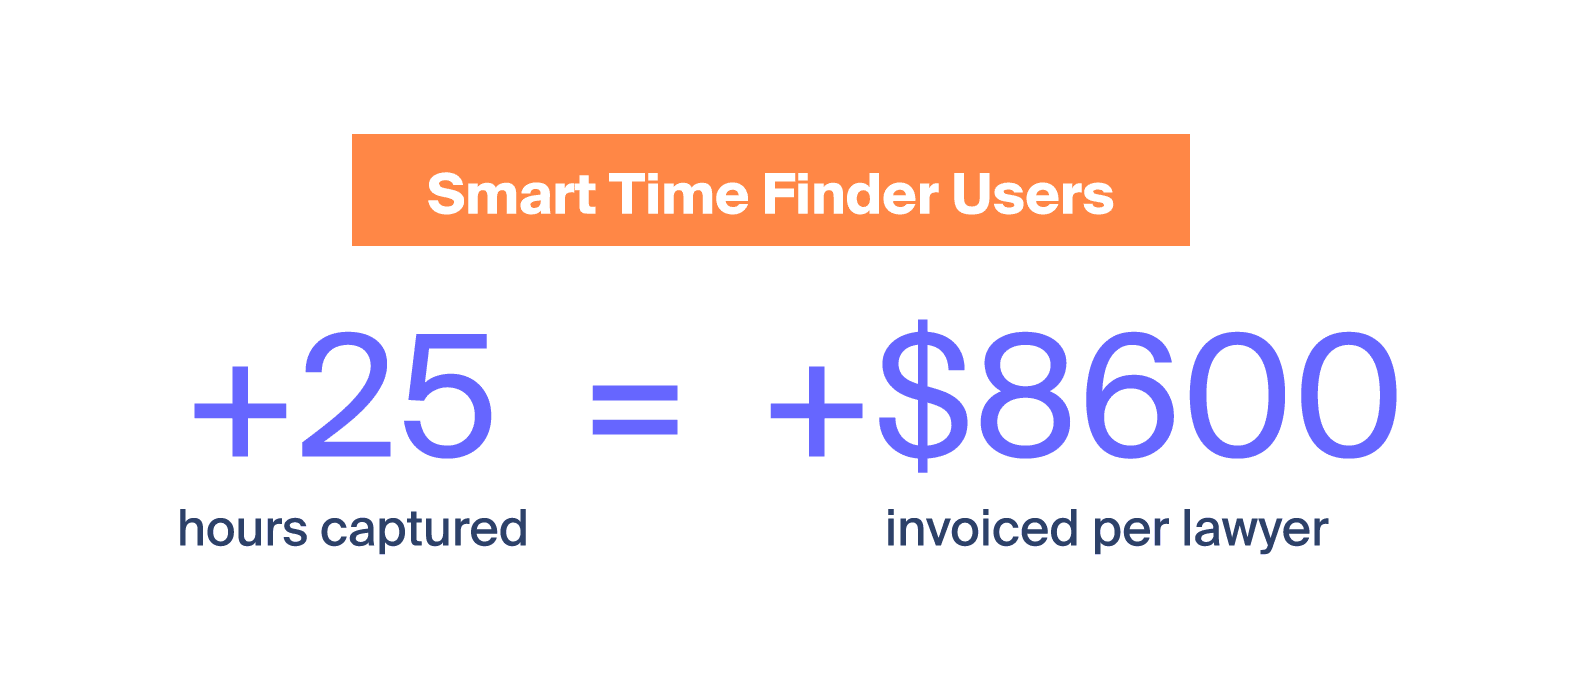 MyCase's Smart Time Finder can help you find hours that previously went unbilled. Visit MyCase to learn more.